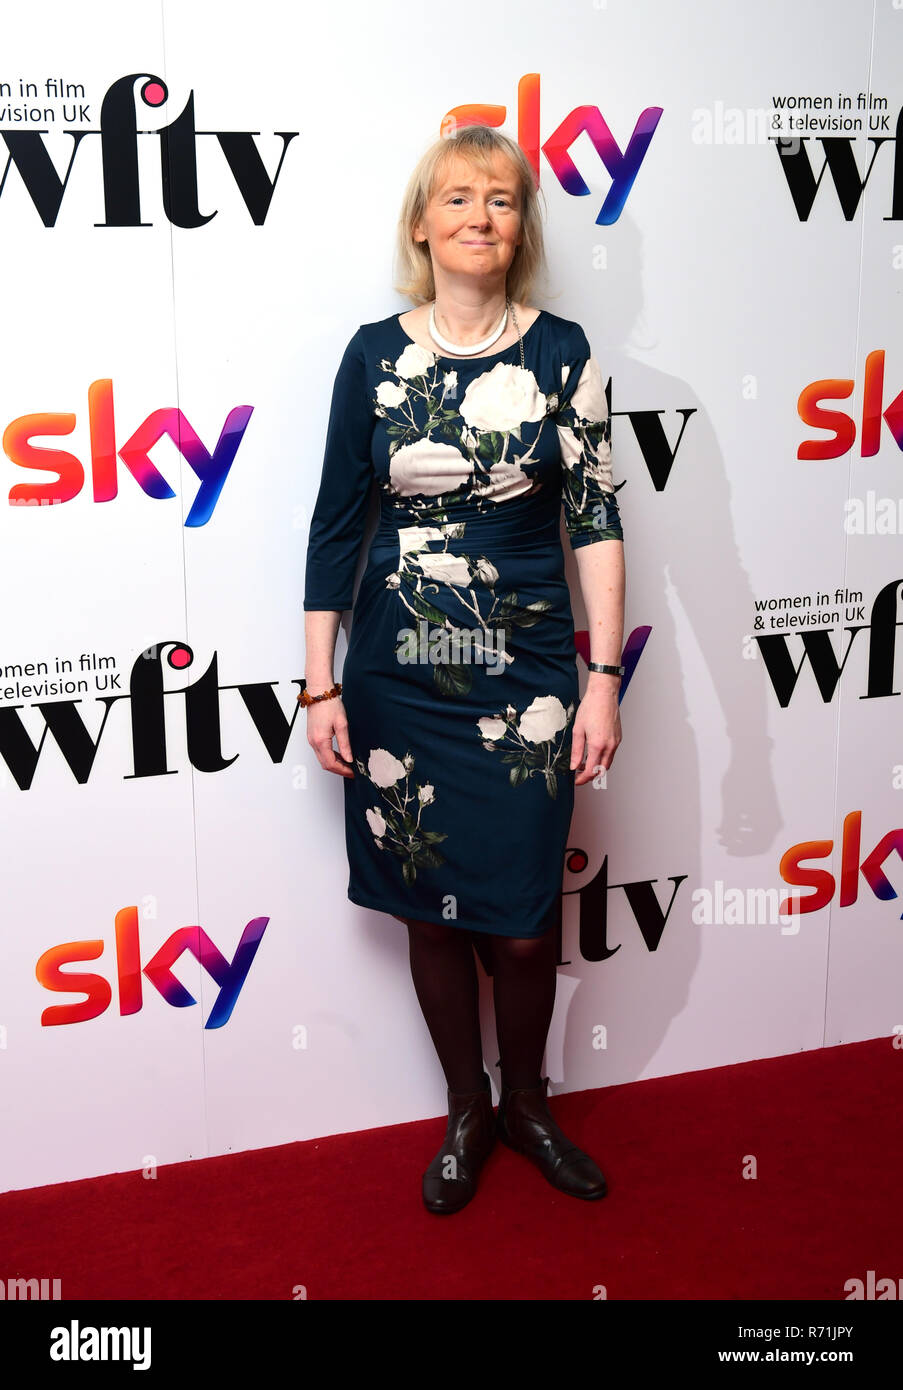 Liz Tucker attending the Women in Film and TV Awards 2018, held at the Hilton in London. Stock Photo